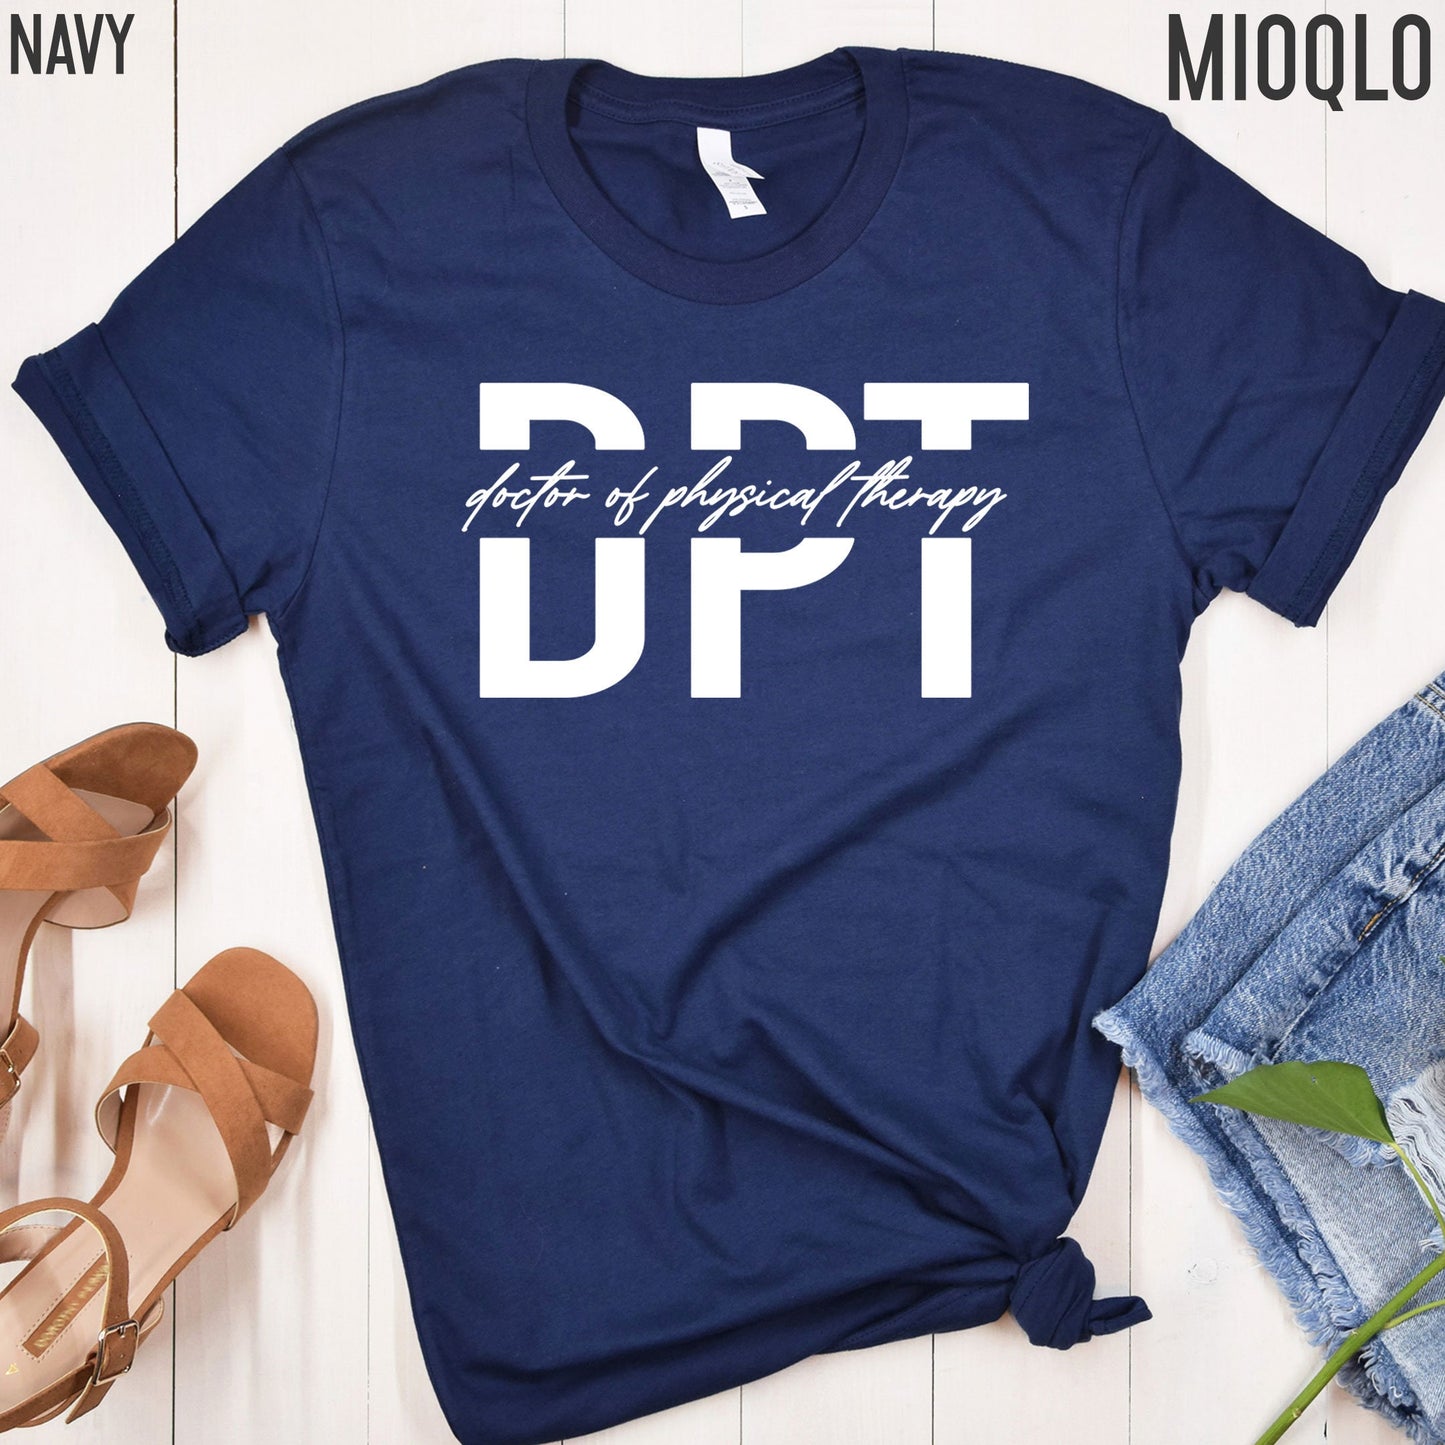 DPT Shirt, Doctor Of Physical Therapy, DPT Gift, Physical Therapy Shirt, Physical Therapist Assistant, PTA Shirt, Physical Therapy Gift Tee